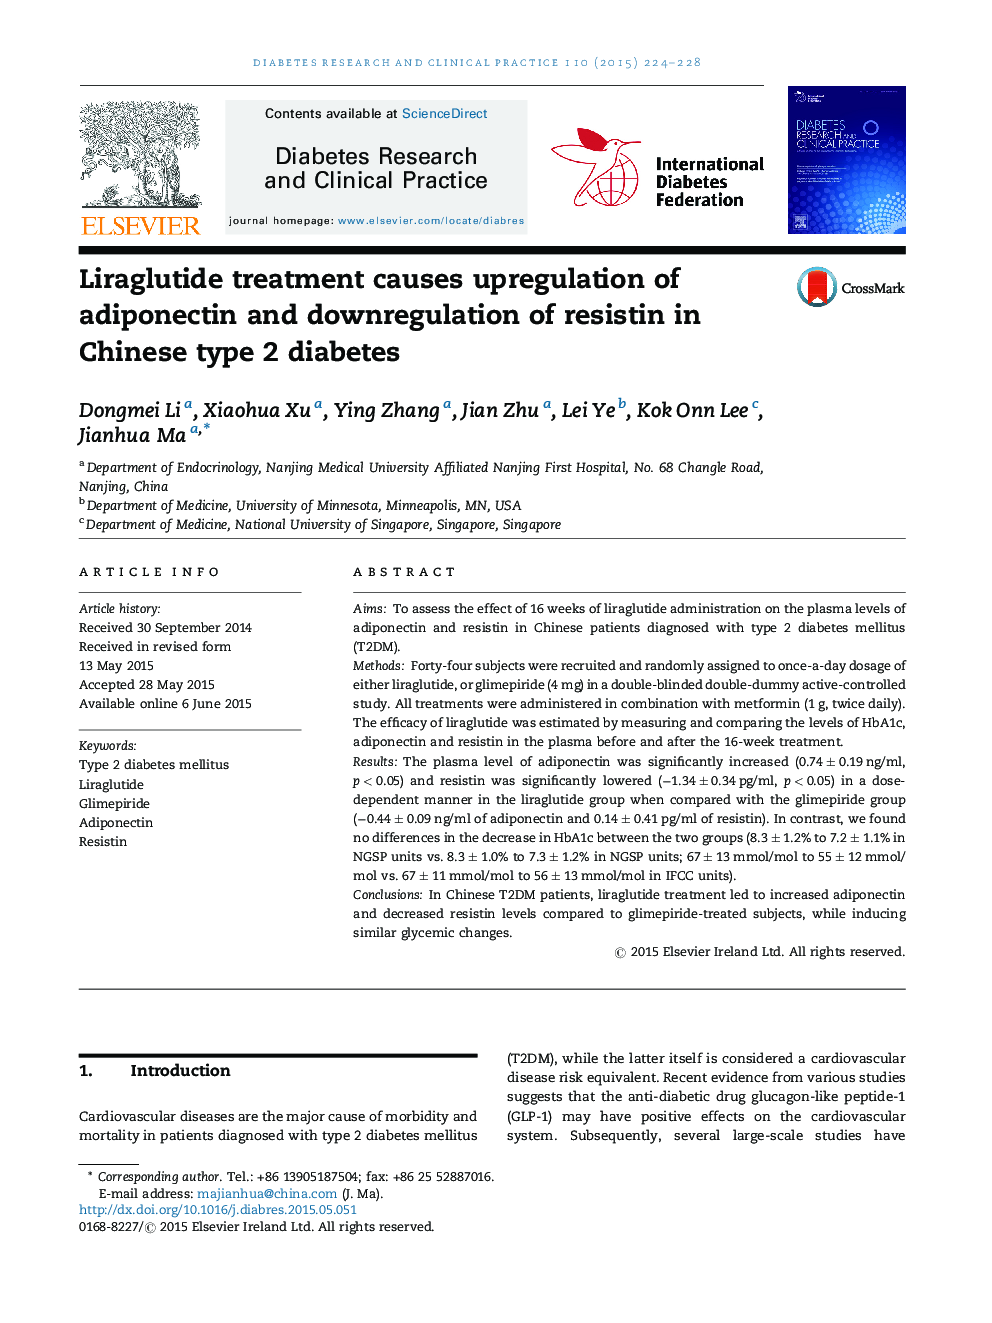 Liraglutide treatment causes upregulation of adiponectin and downregulation of resistin in Chinese type 2 diabetes